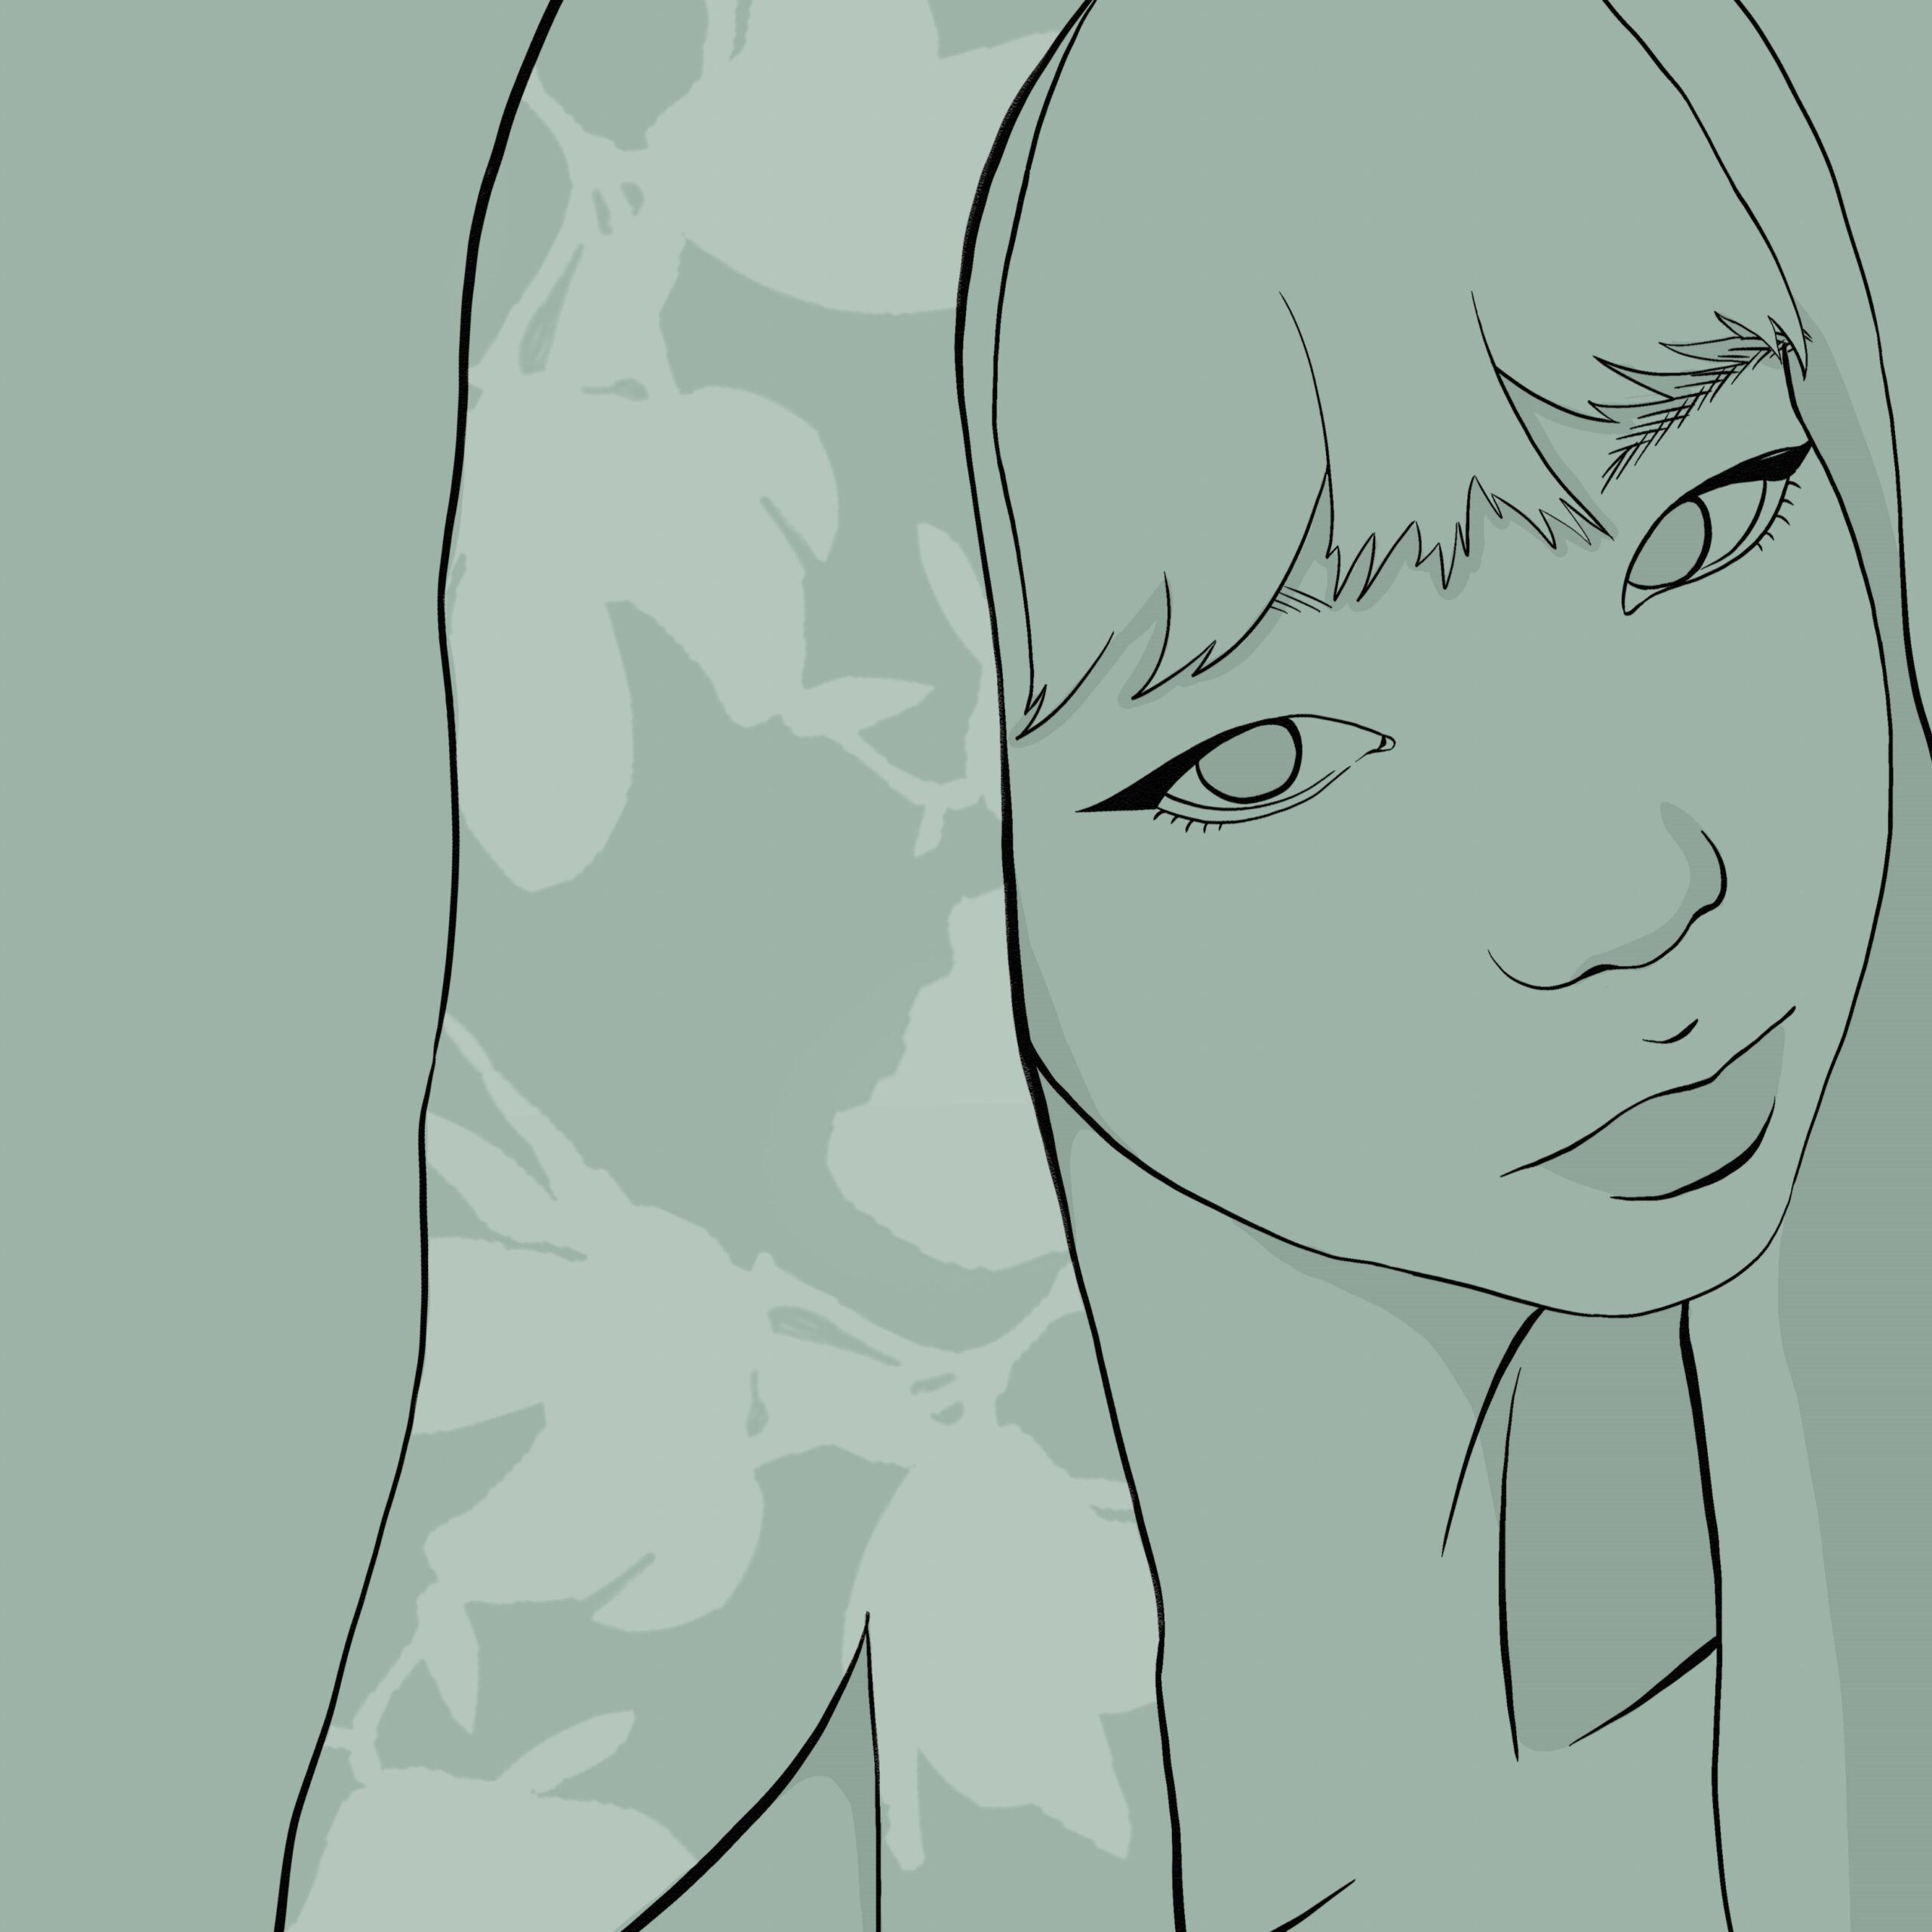 Digital illustration of a girl with long hair and bangs, with a floral silhouette in her hair in a monochromatic mint green color scheme